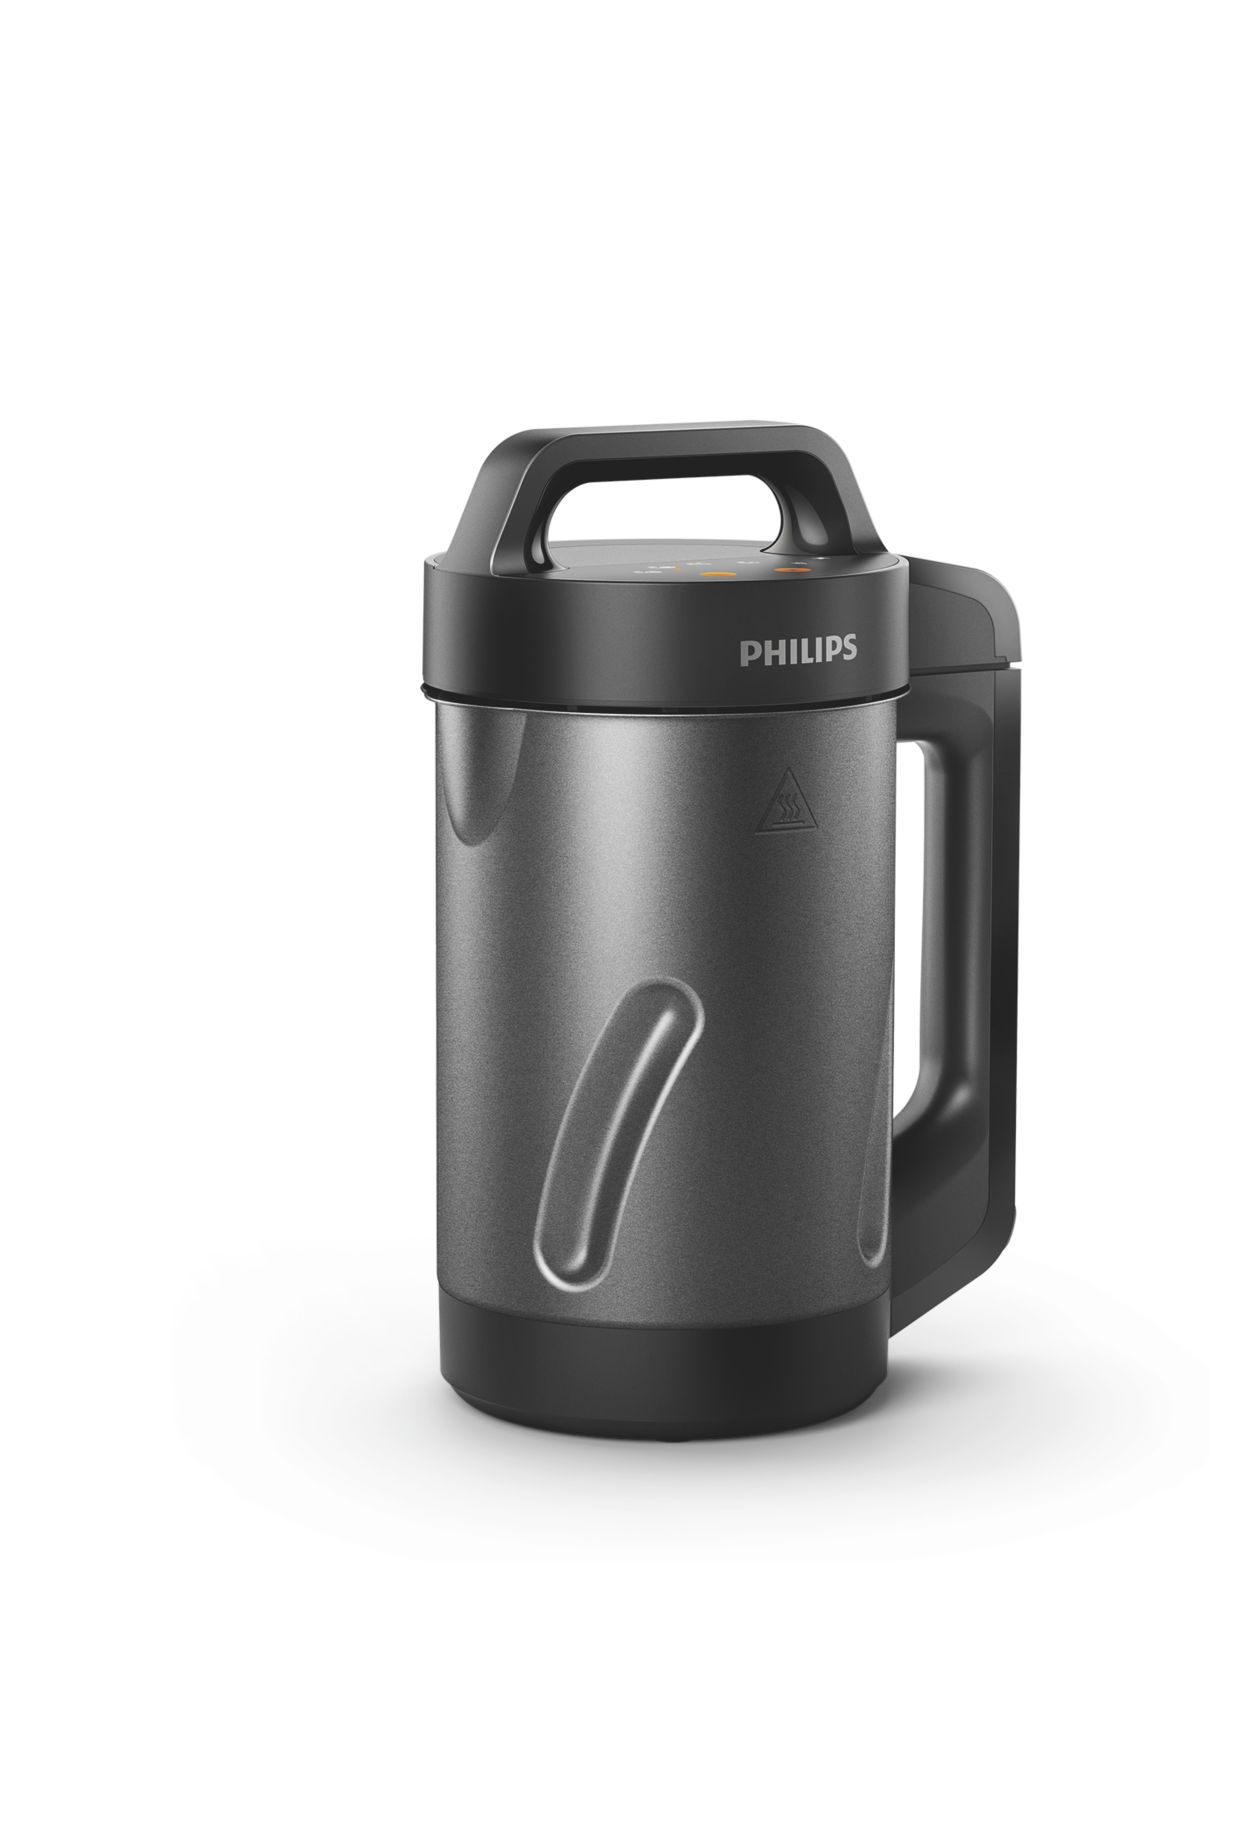 How to Use the Philips Soup Maker - Williams-Sonoma Taste